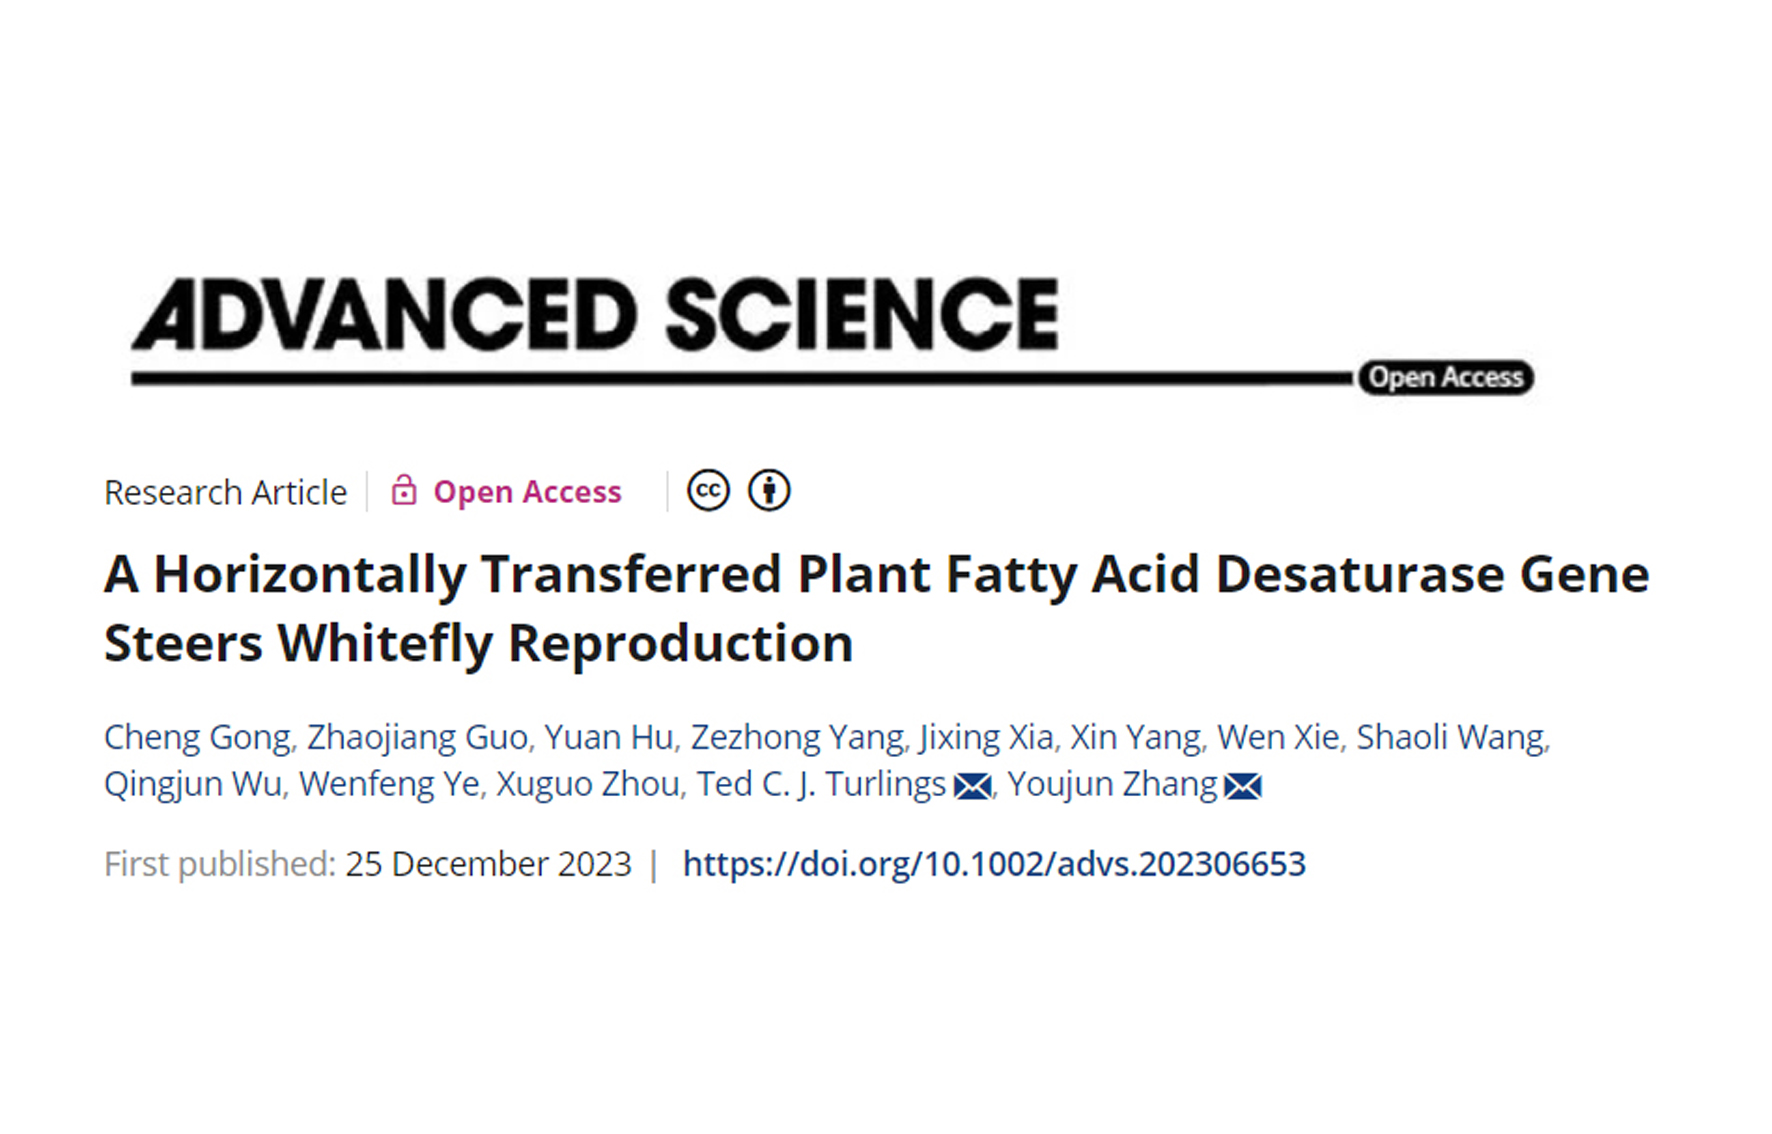 A horizontally transferred plant fatty acid desaturase gene steers whitefly reproduction